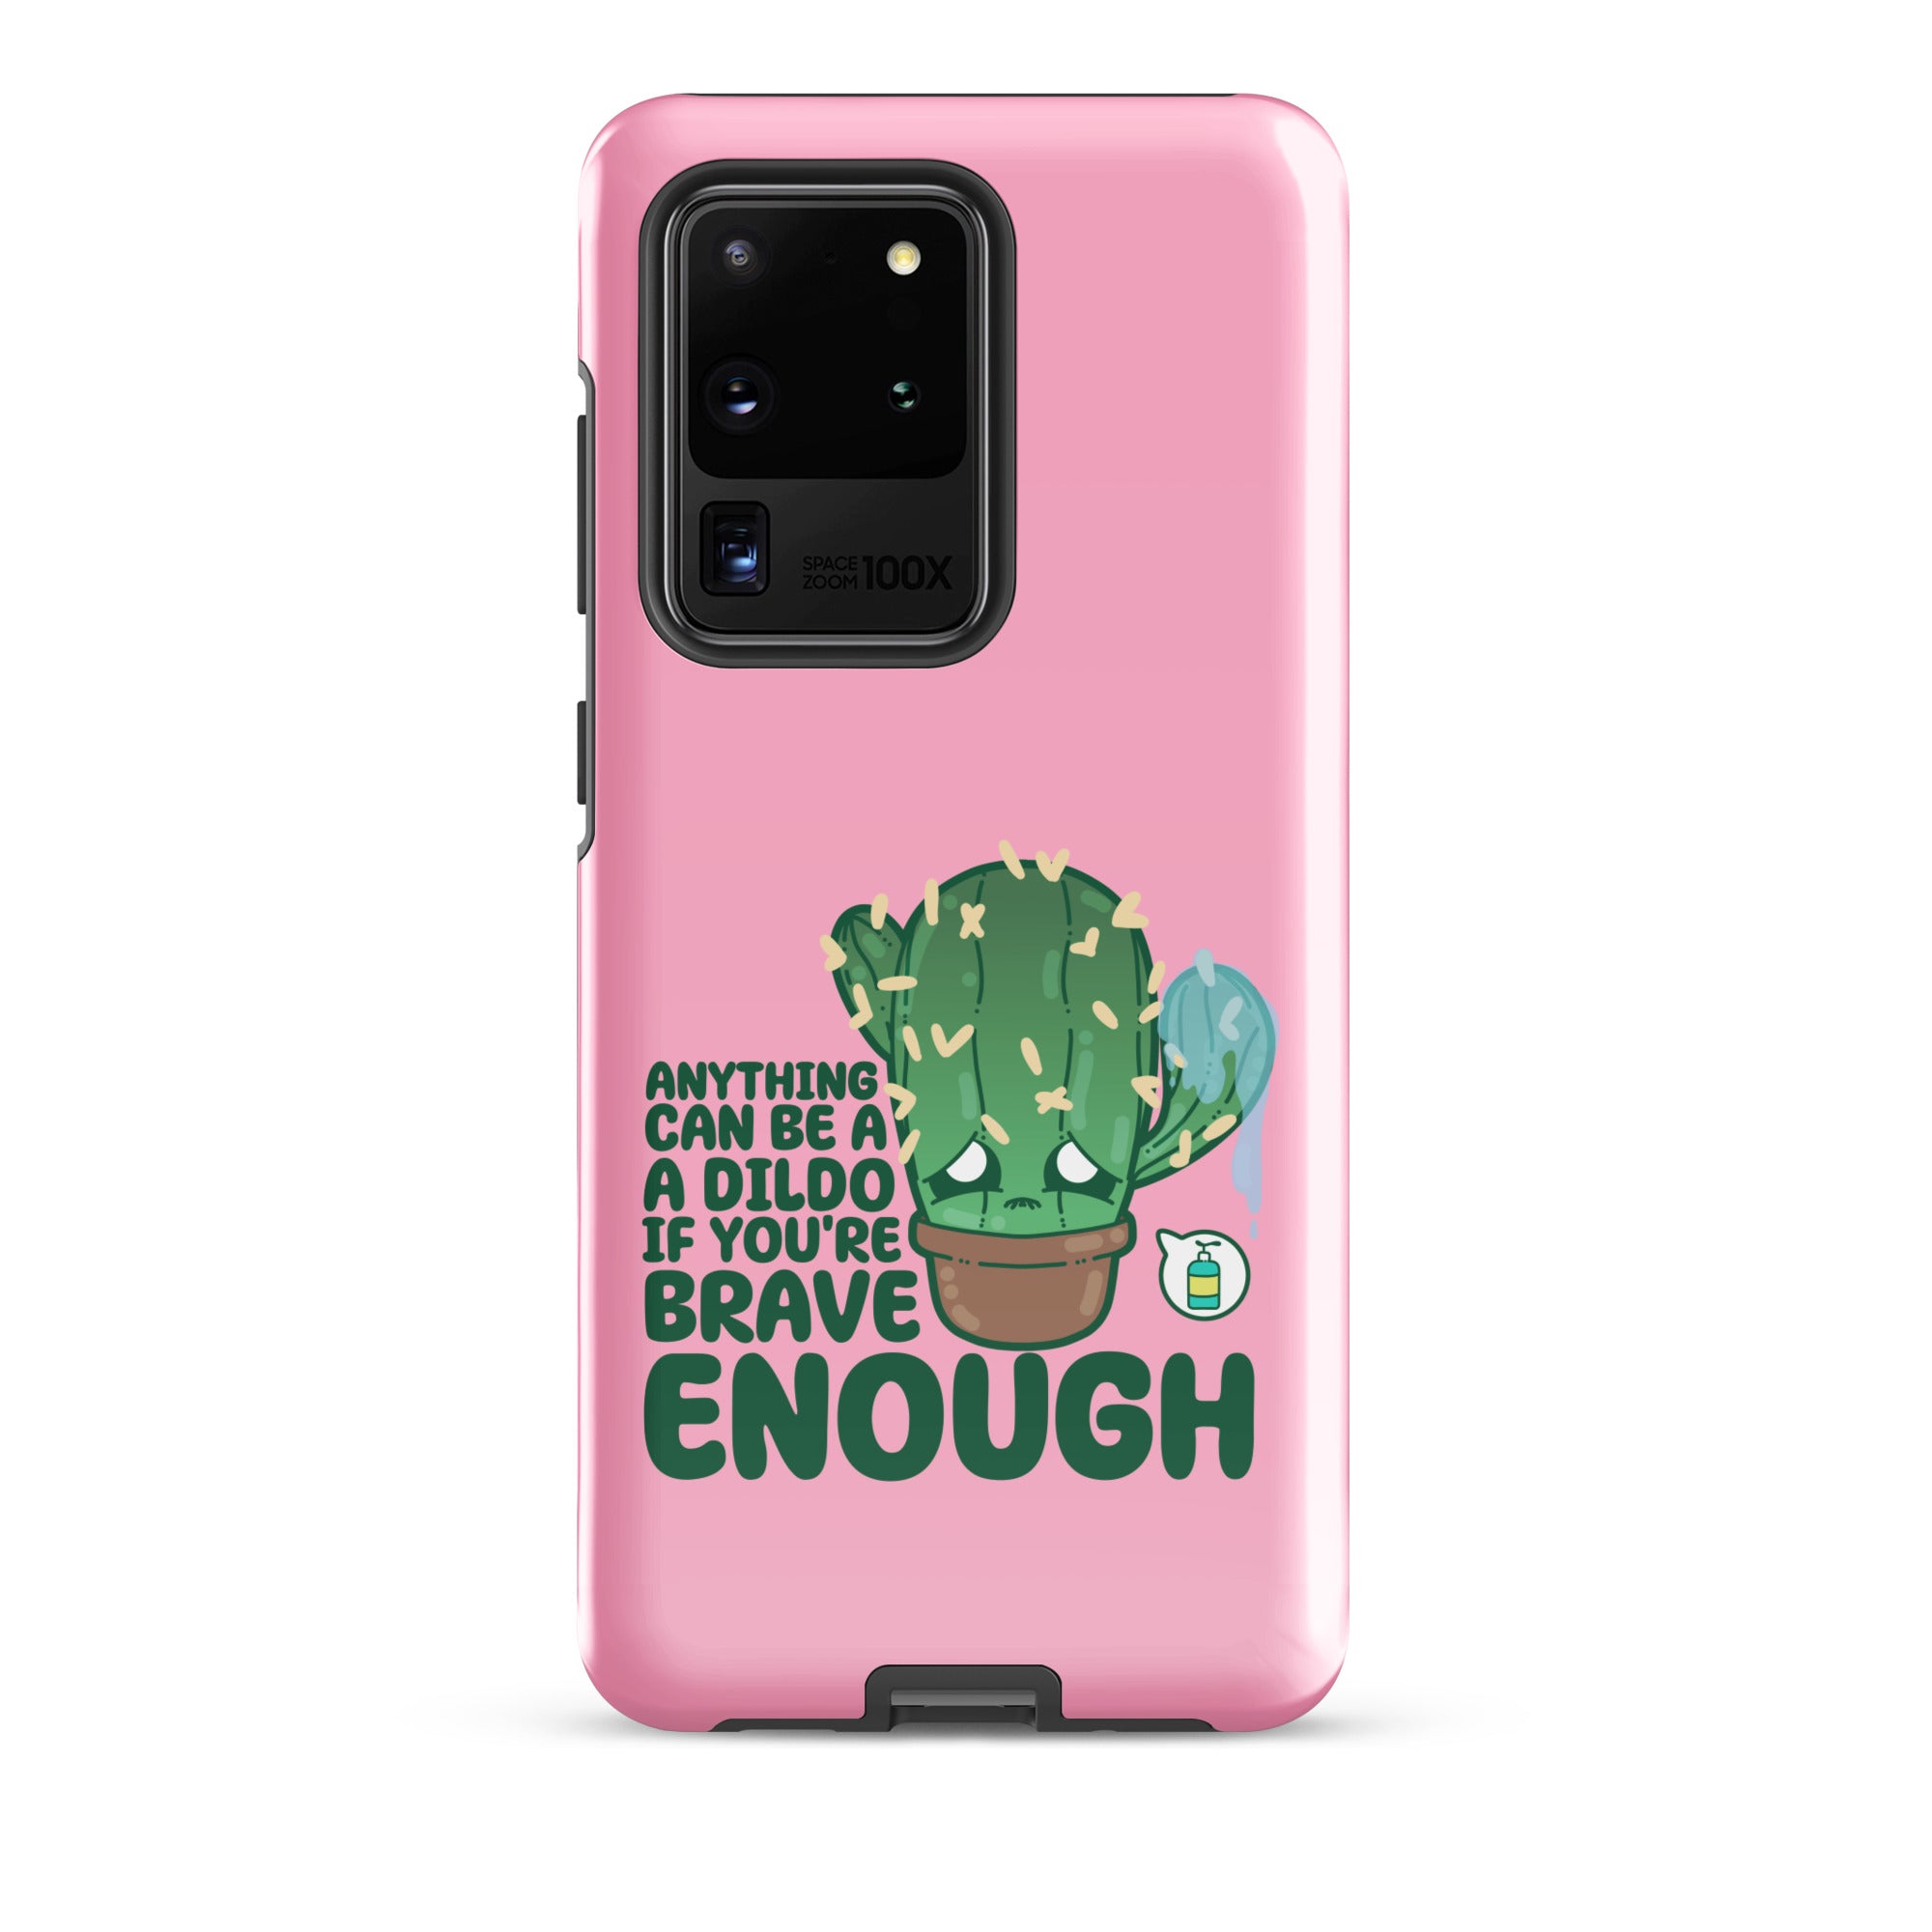 ANYTHING CAN BE A DILDO - Tough case for Samsung®